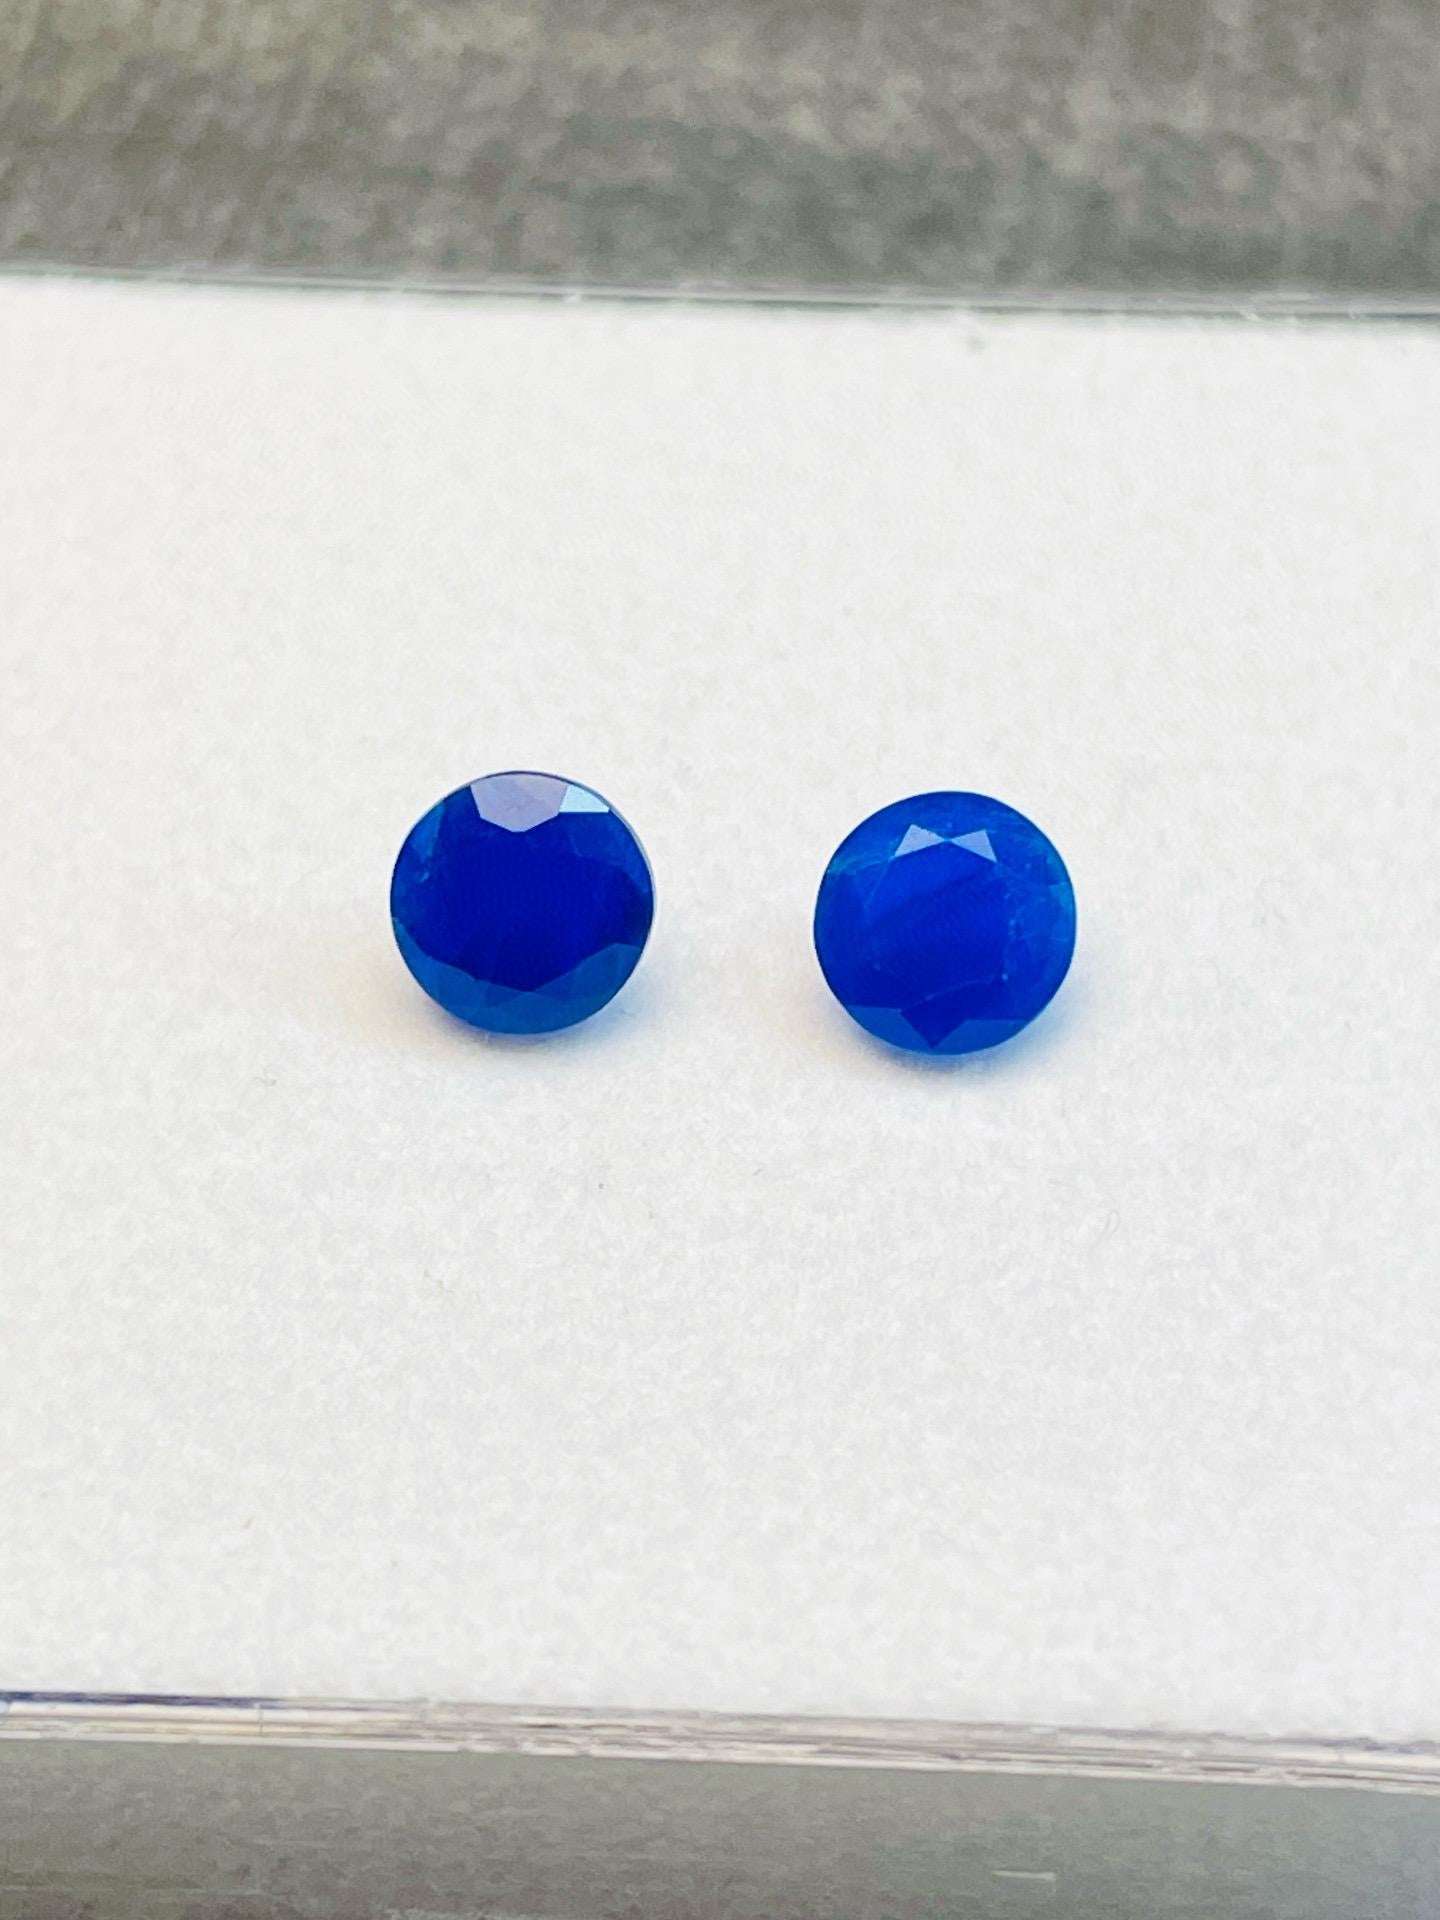 Rere Hauyne stone 0.72ct pair with GIT certificate deep blue natural no treatment.

Name: Hauyne
Weight: 0.72ct for 2 pcs
Size:  On certificate 
Origin: Afghanistan 
Color: deep blue 
Clarity: 99% /98% 
Cut : standard cut no defect
Certificate: GIT